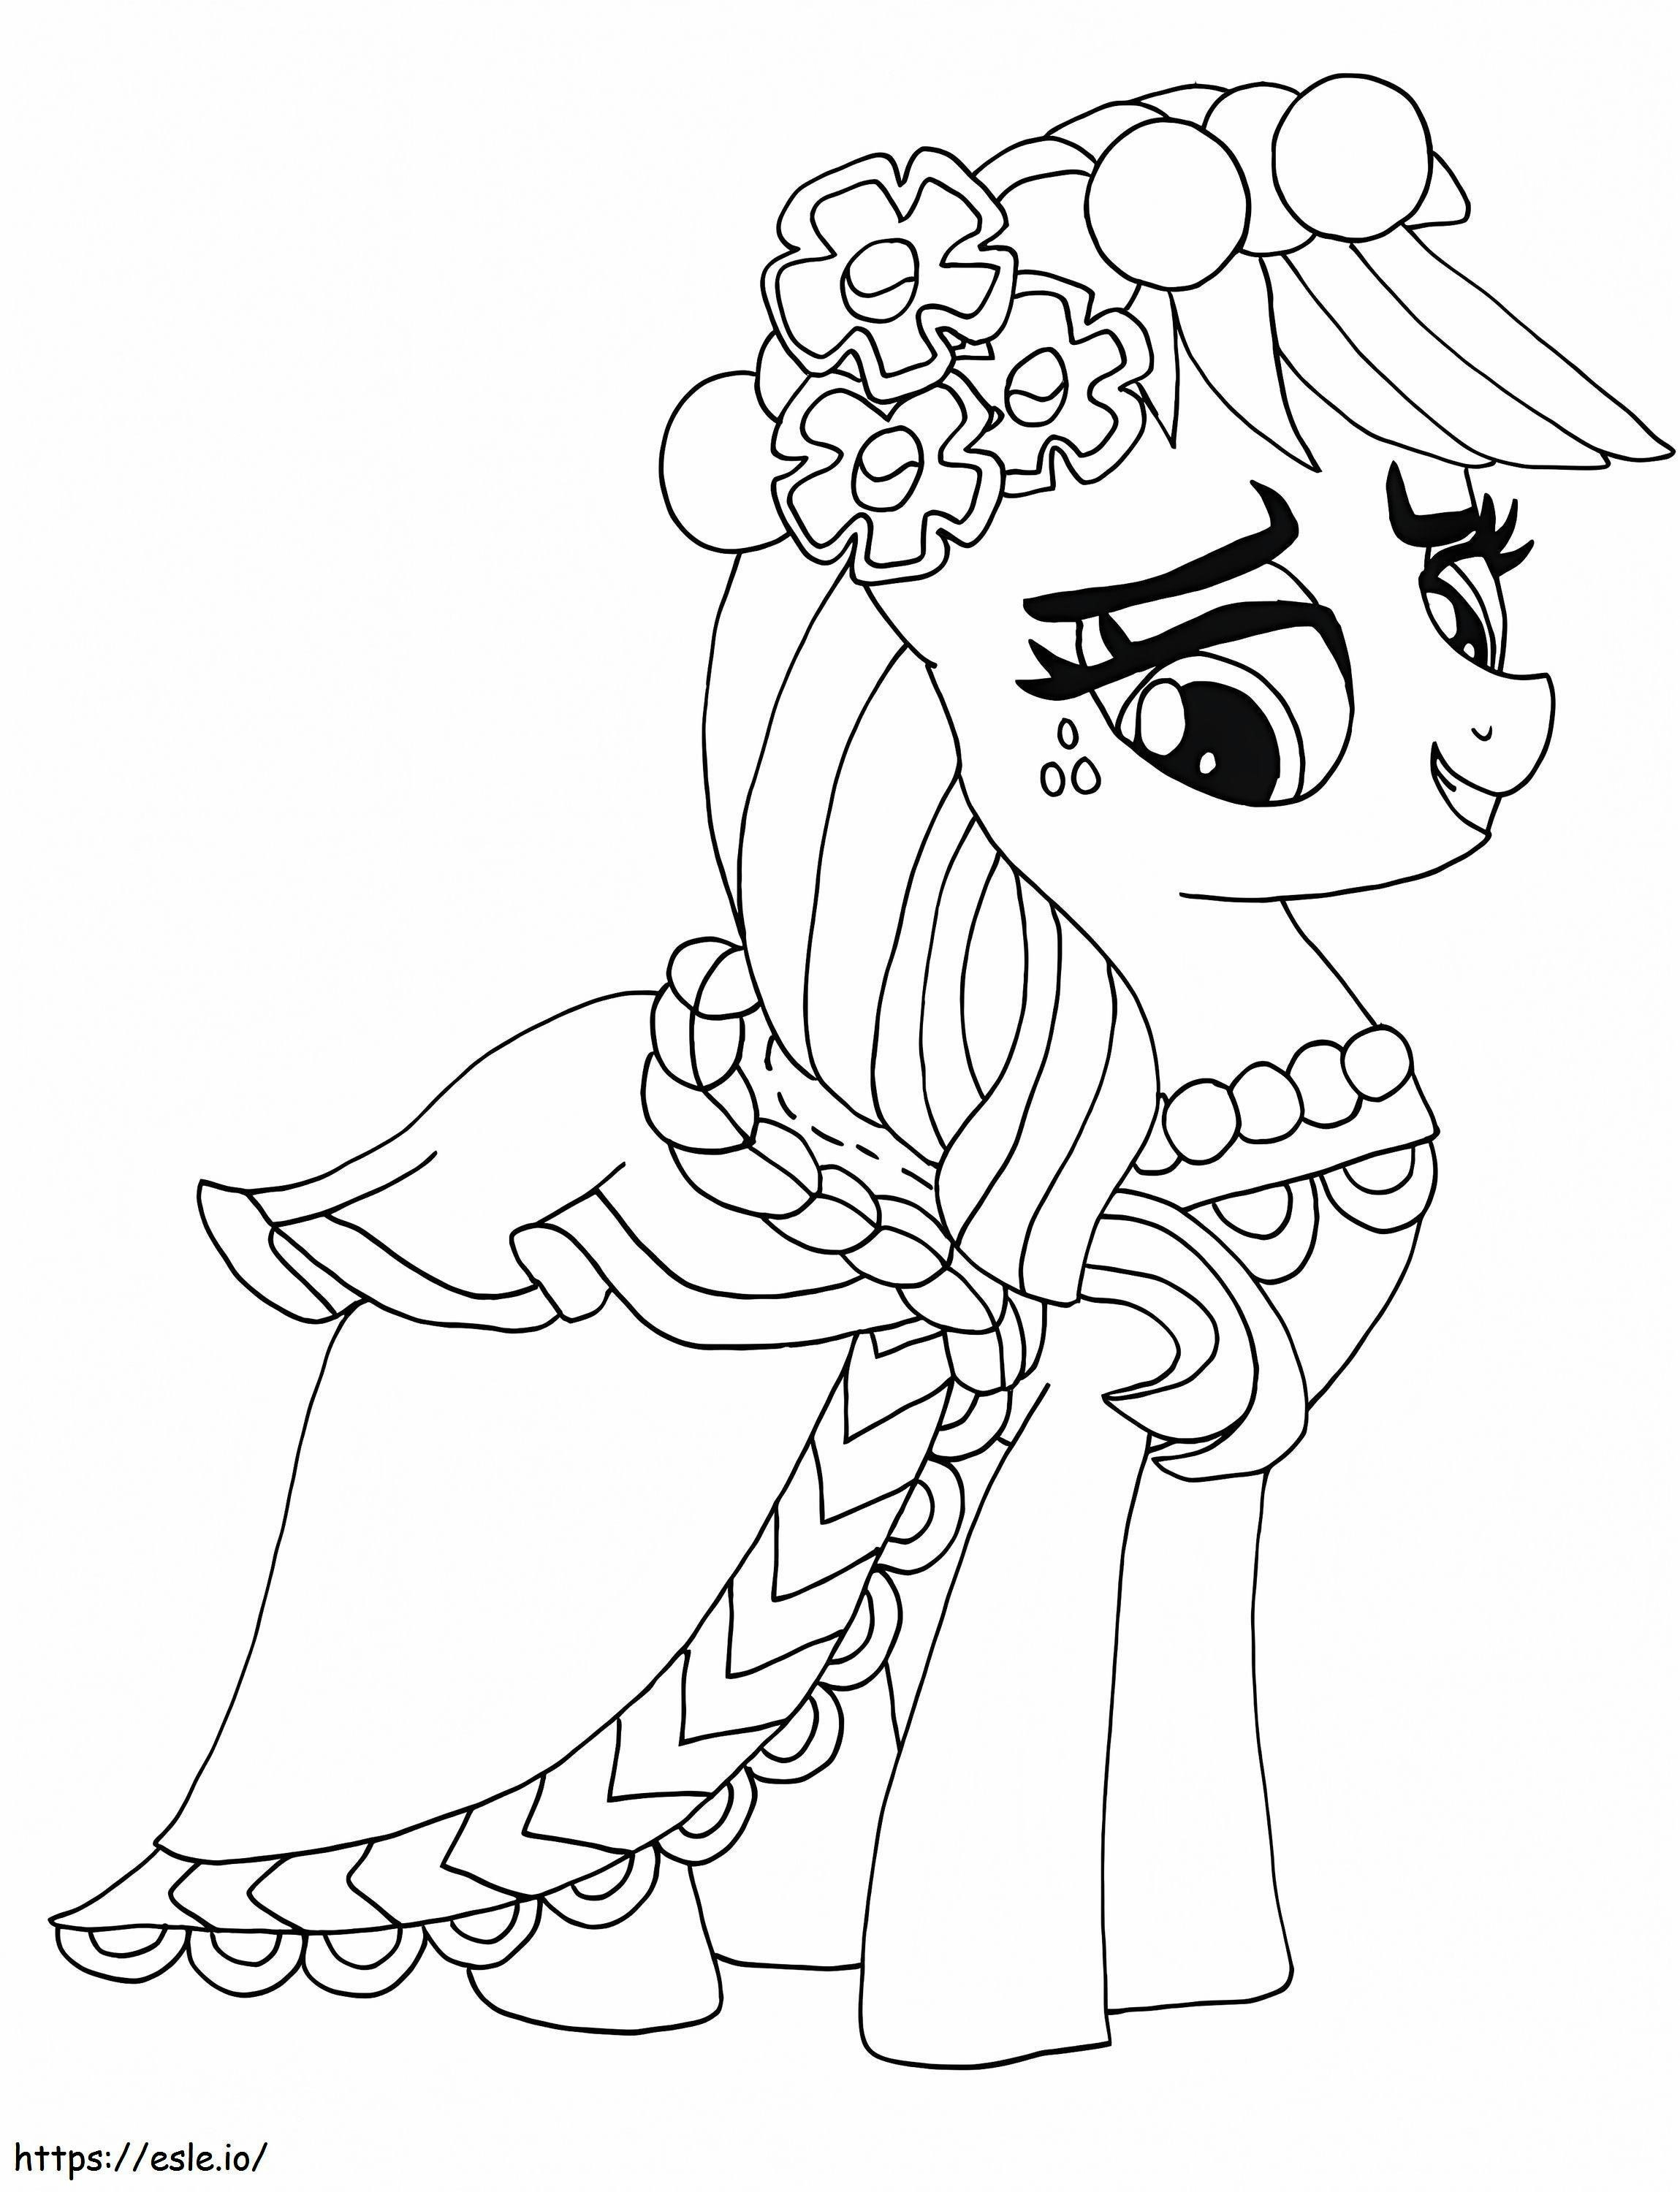 Applejack My Little Pony coloring page